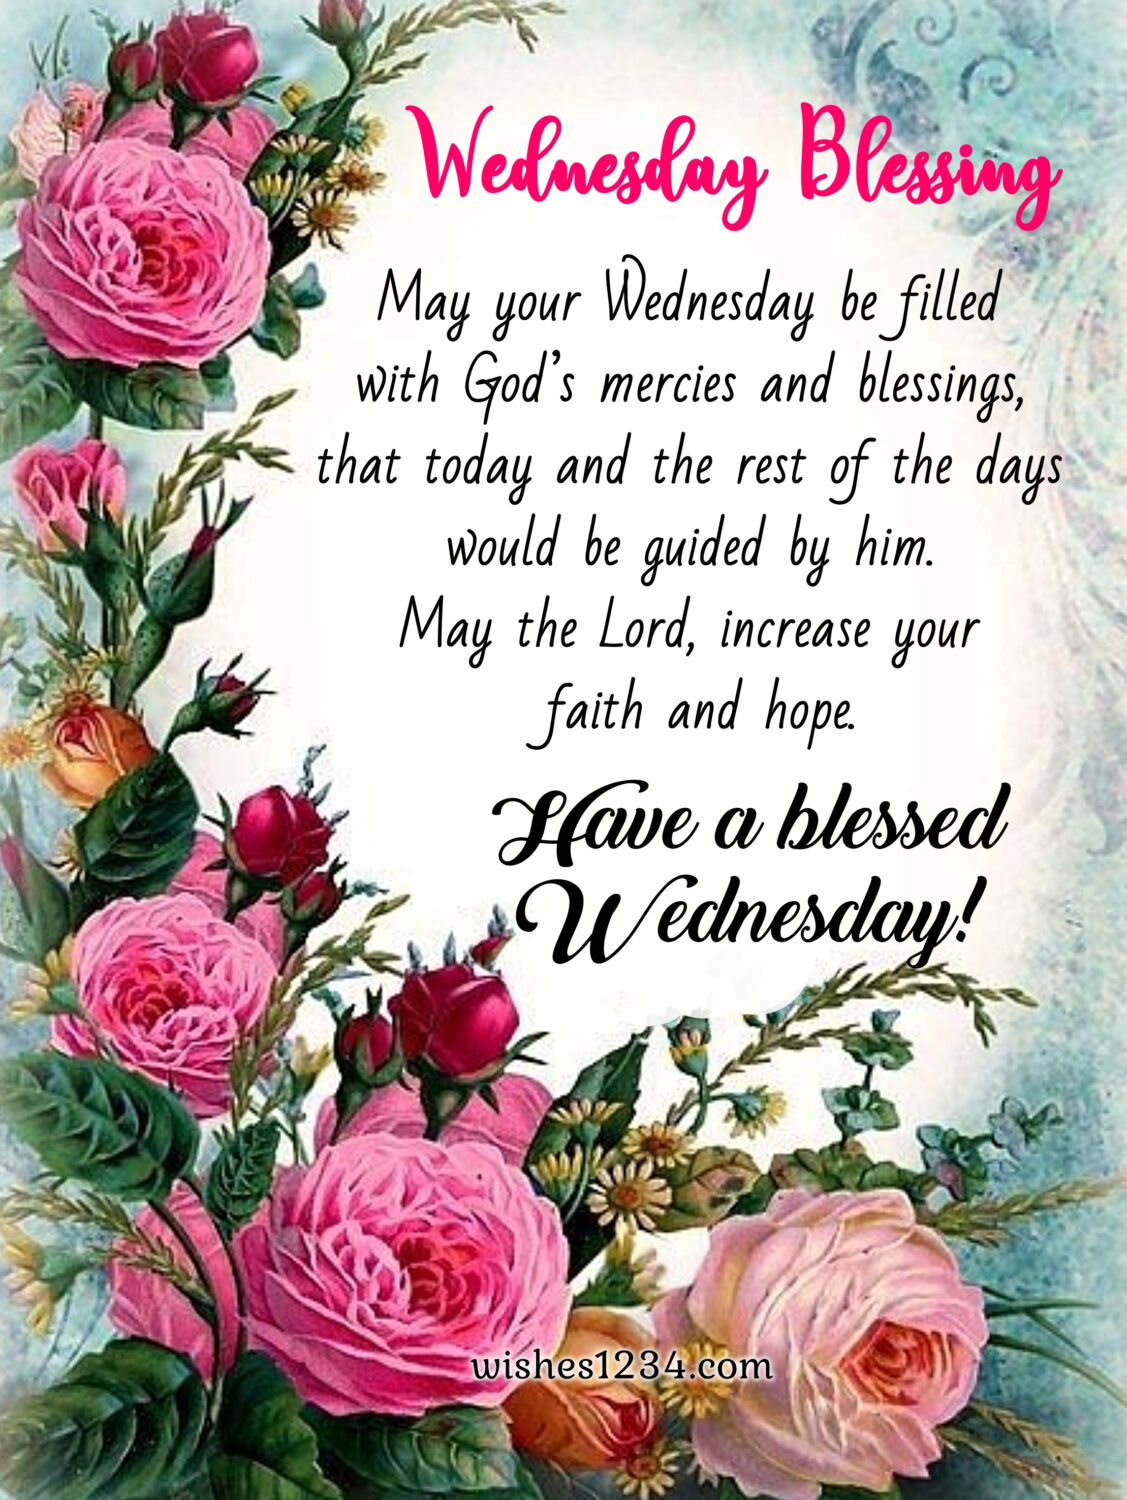 Wednesday blessing with pink roses border, Blessings Wednesday.